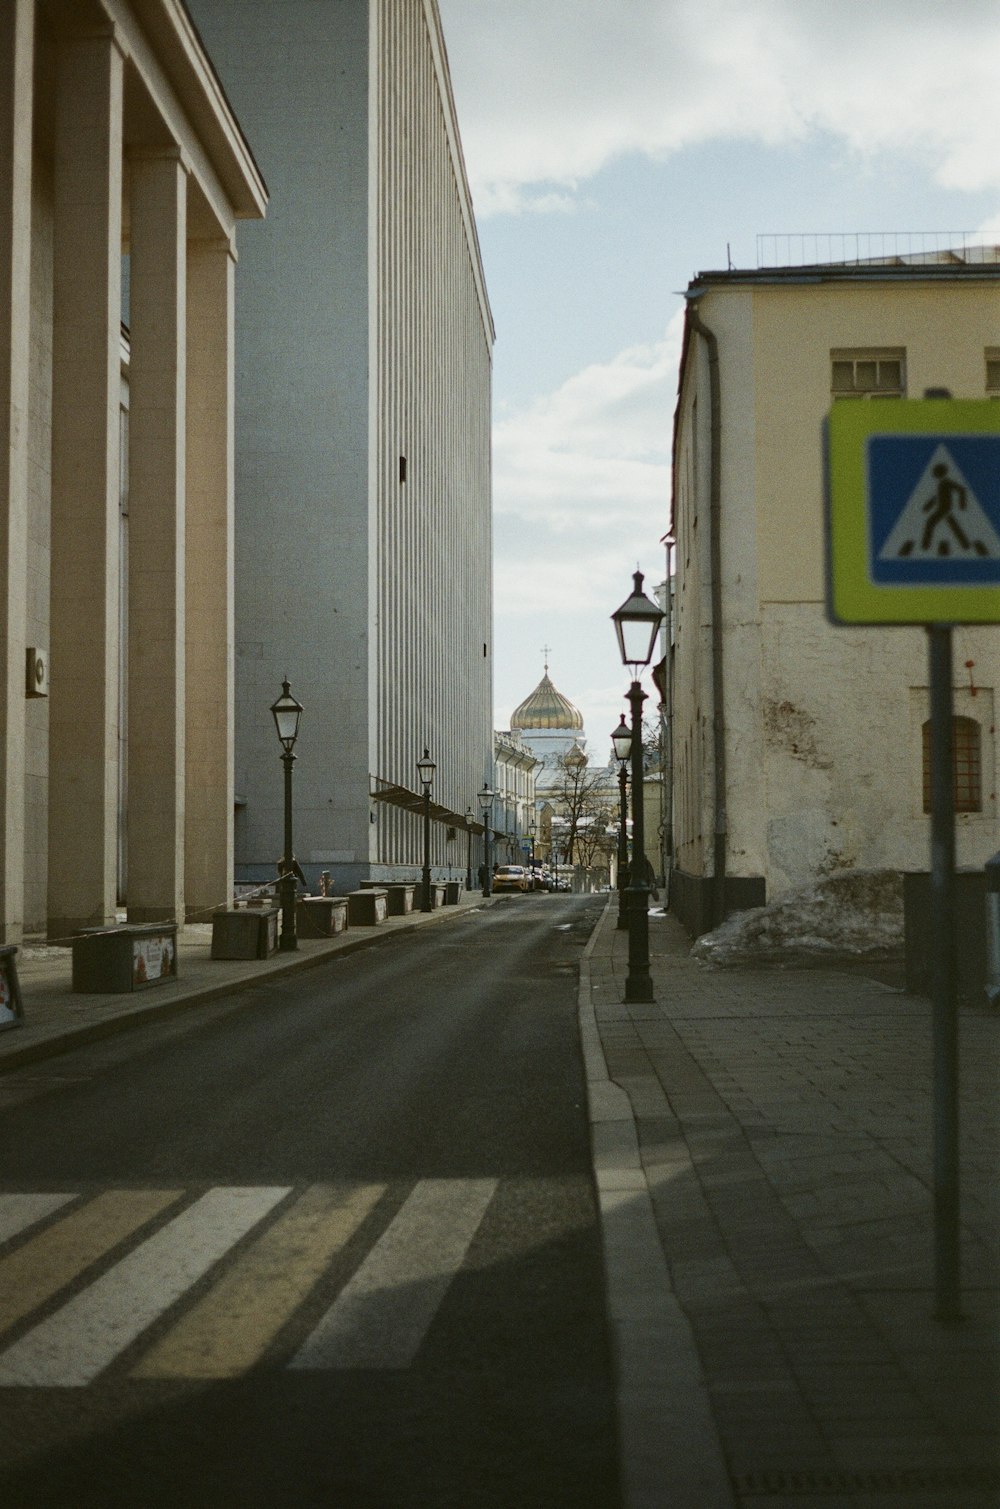 a city street with buildings and a street sign